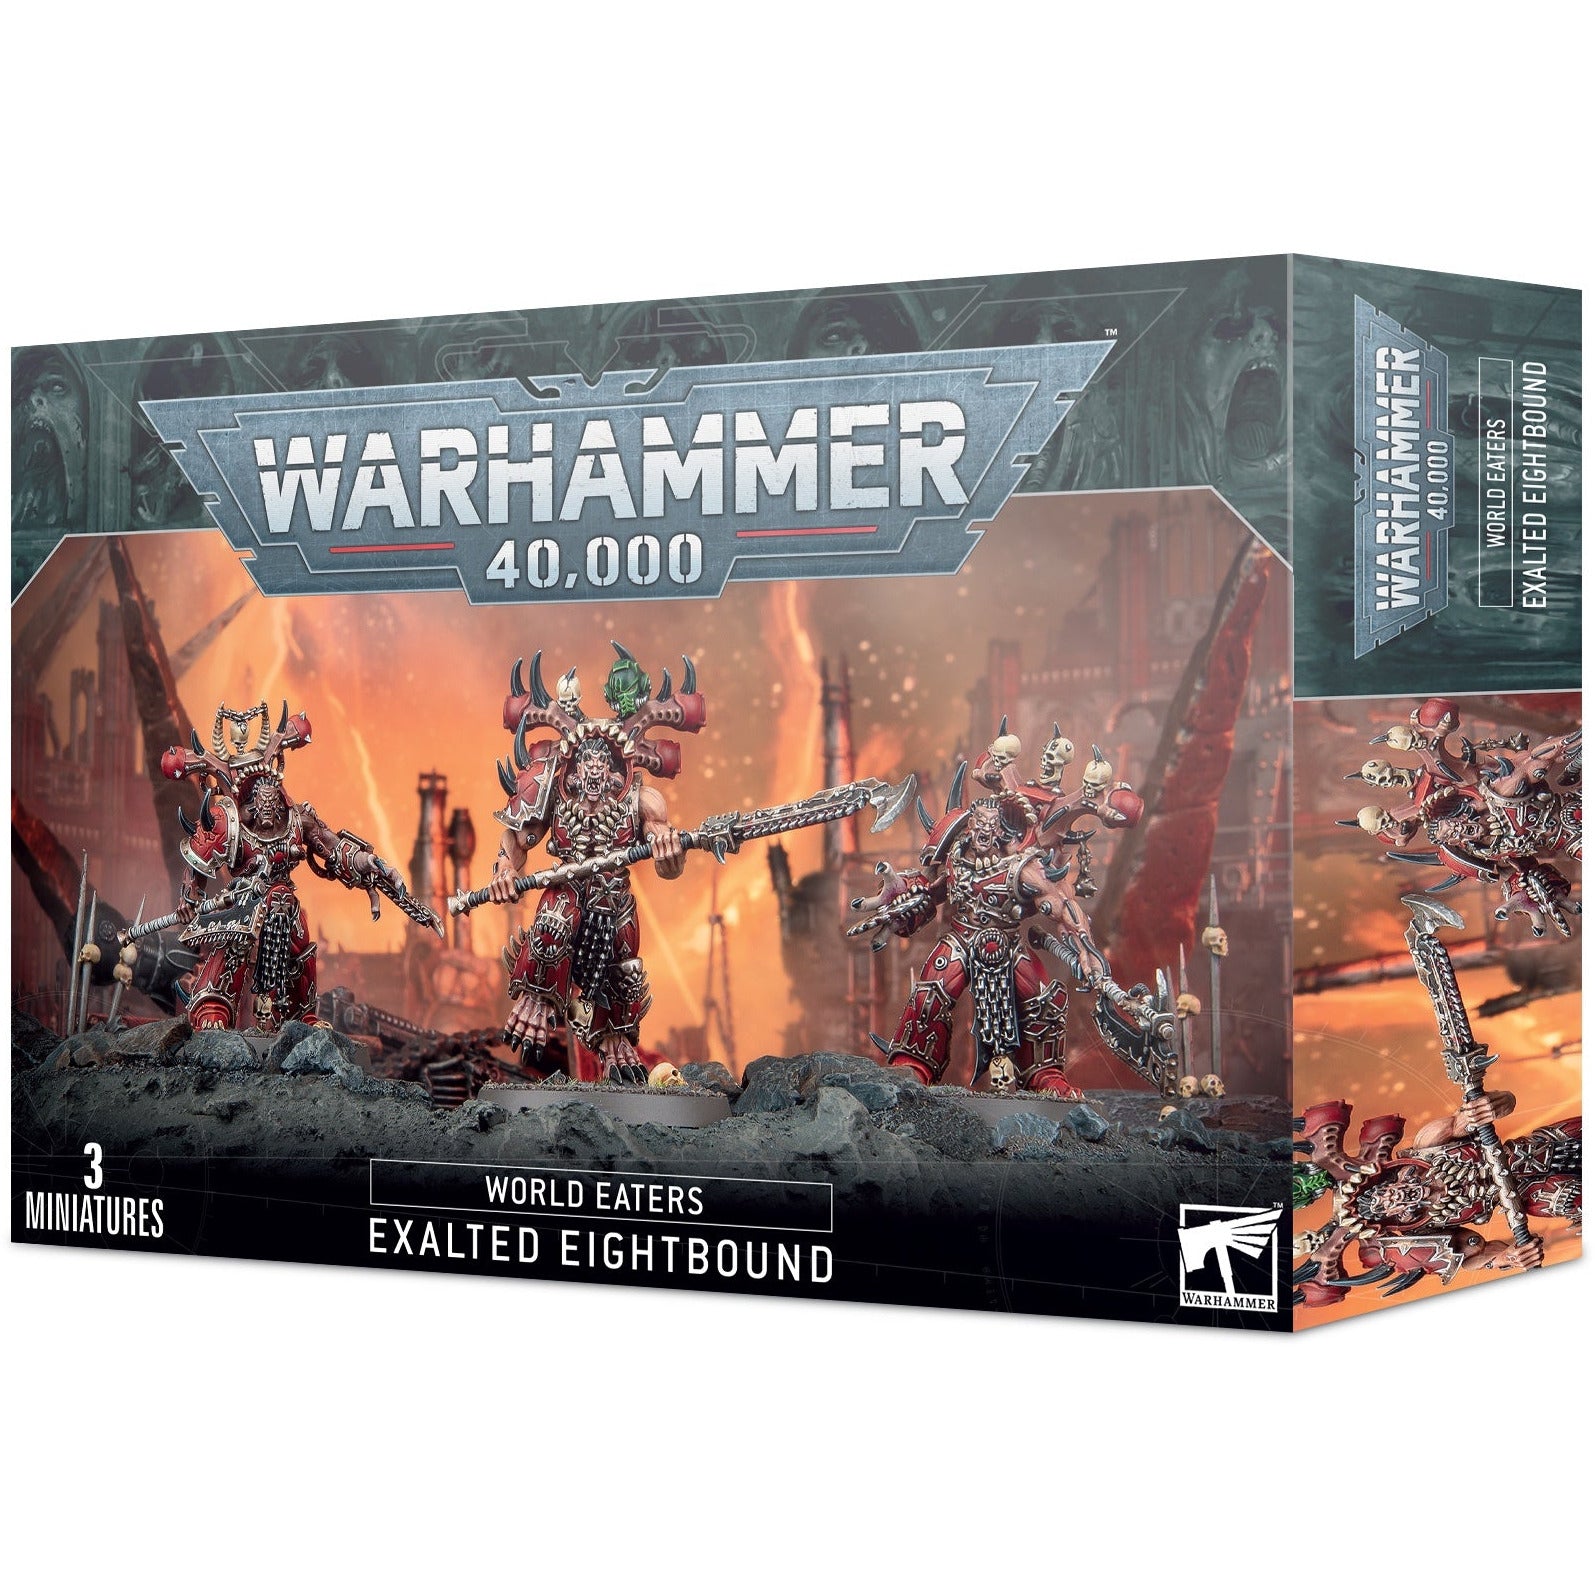 World Eaters: Exhalted Eightbound